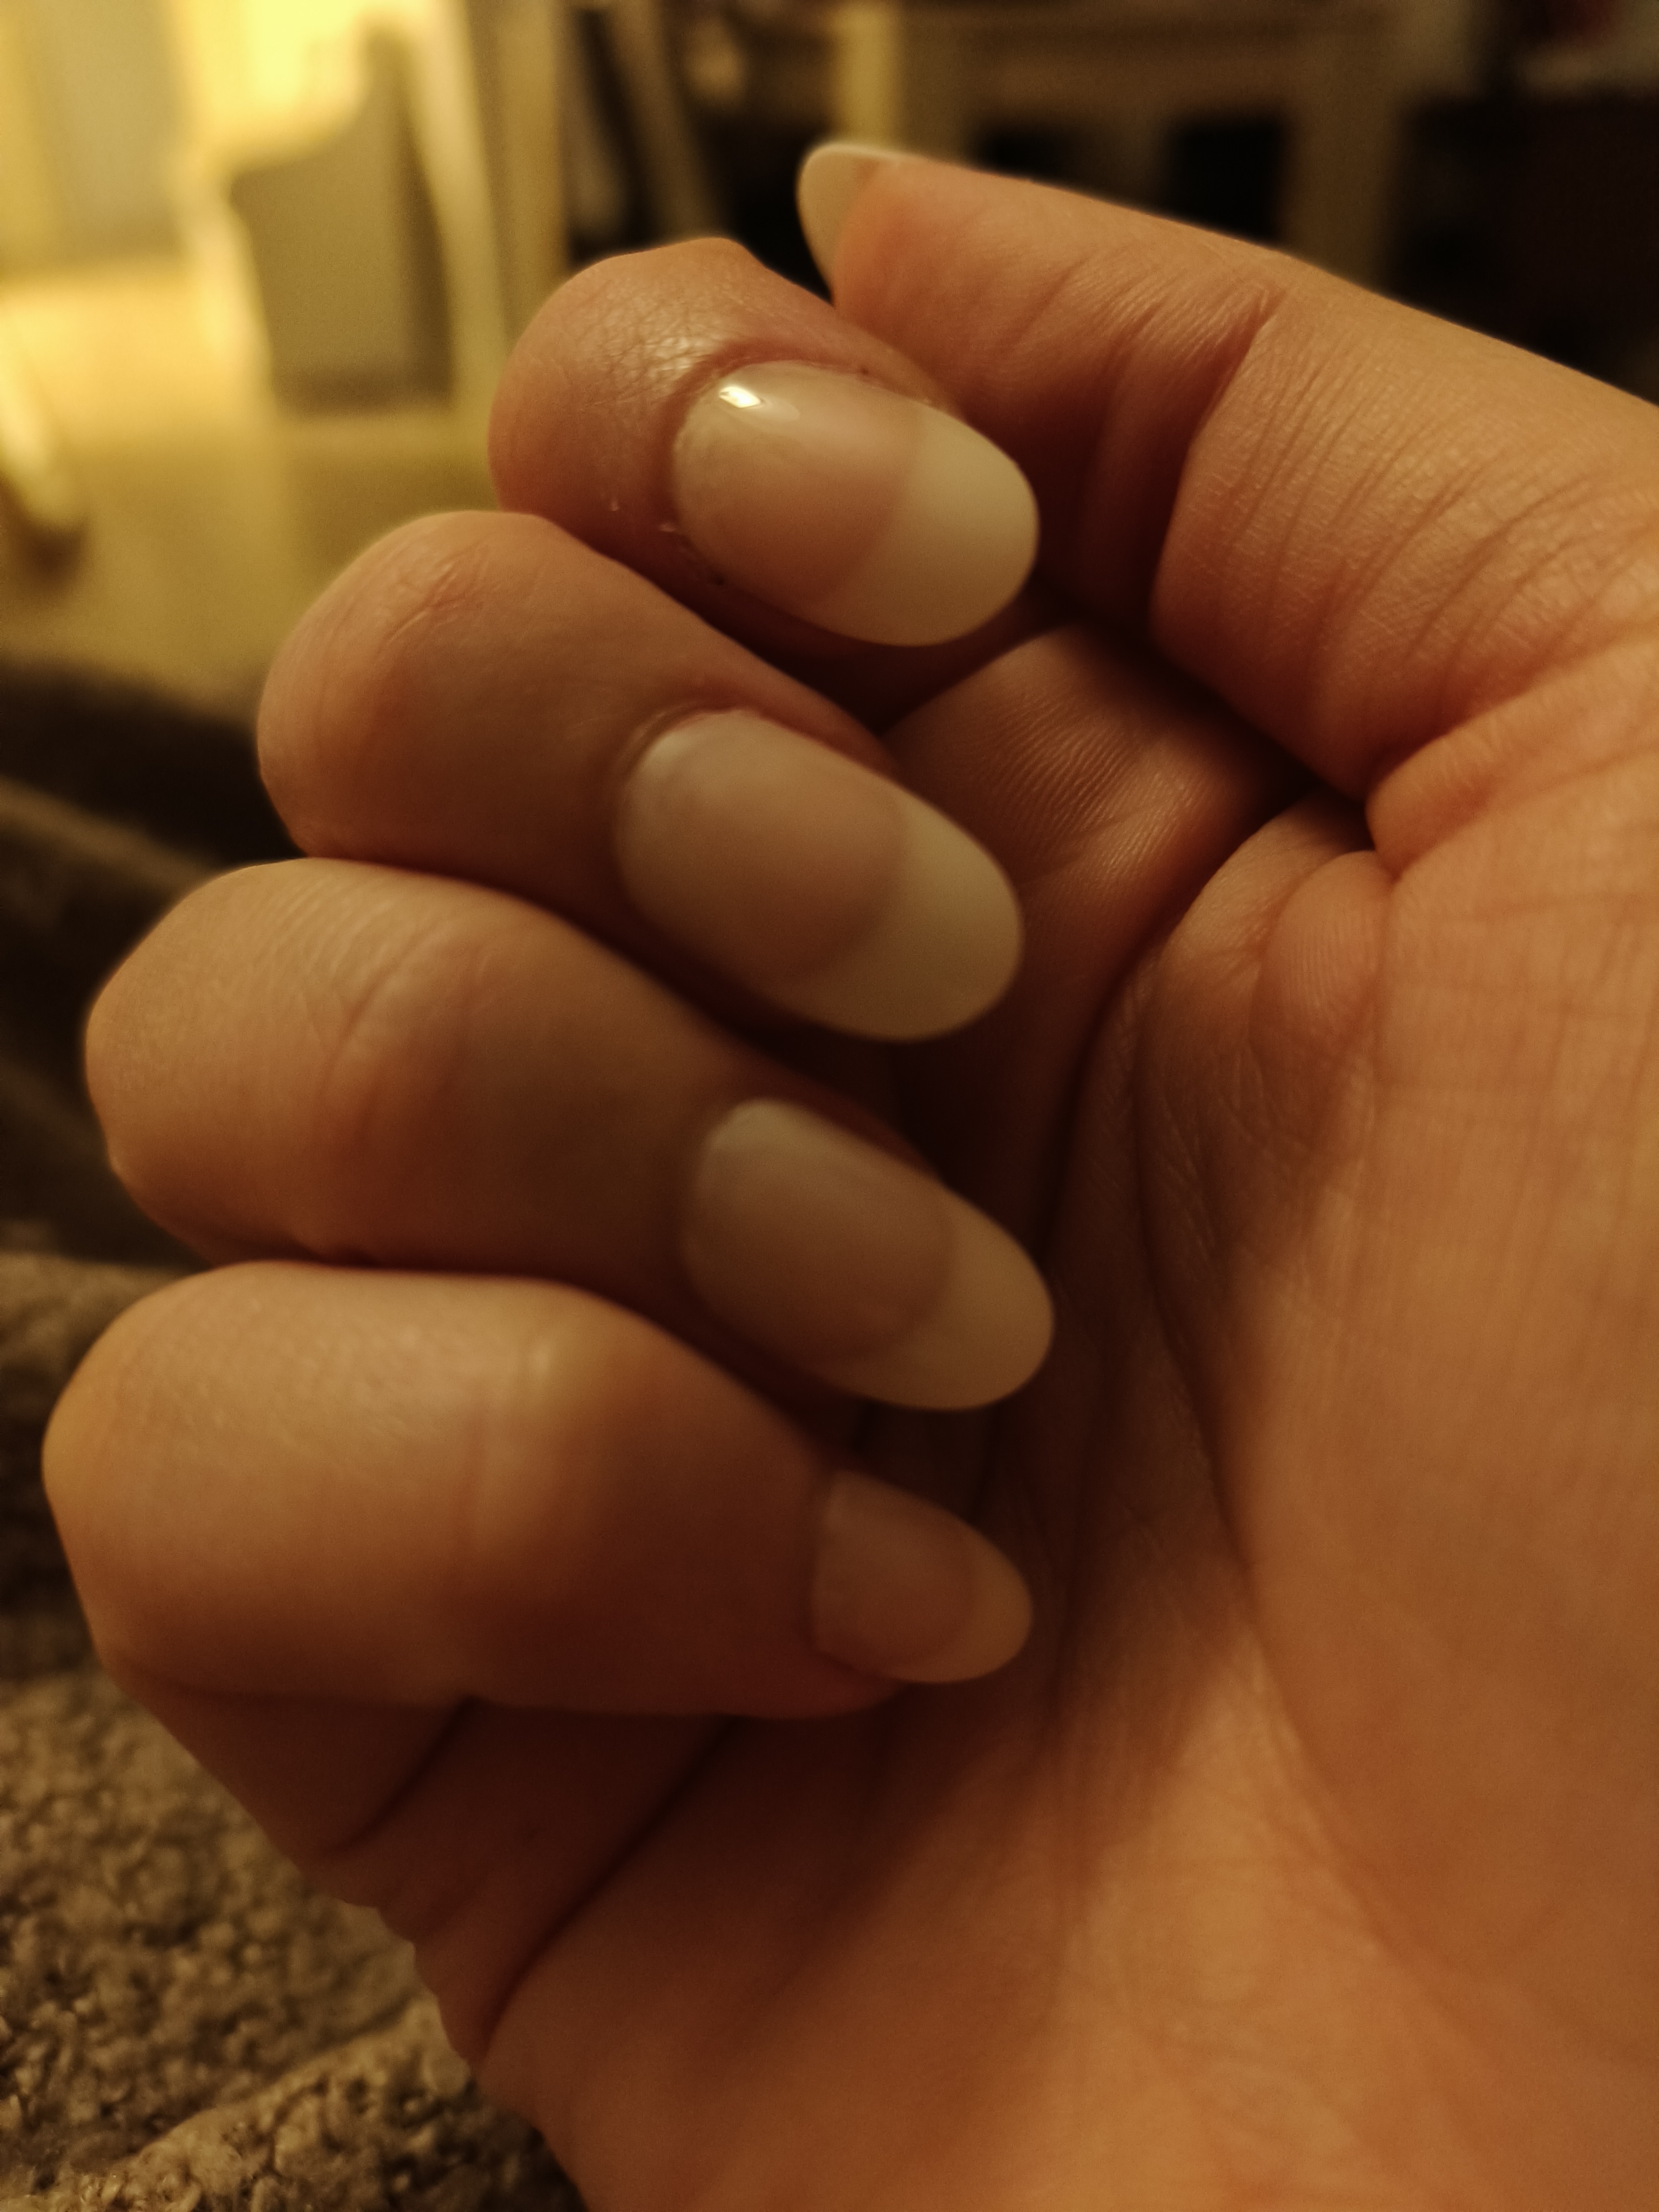 What You Need to Know About COVID Nails